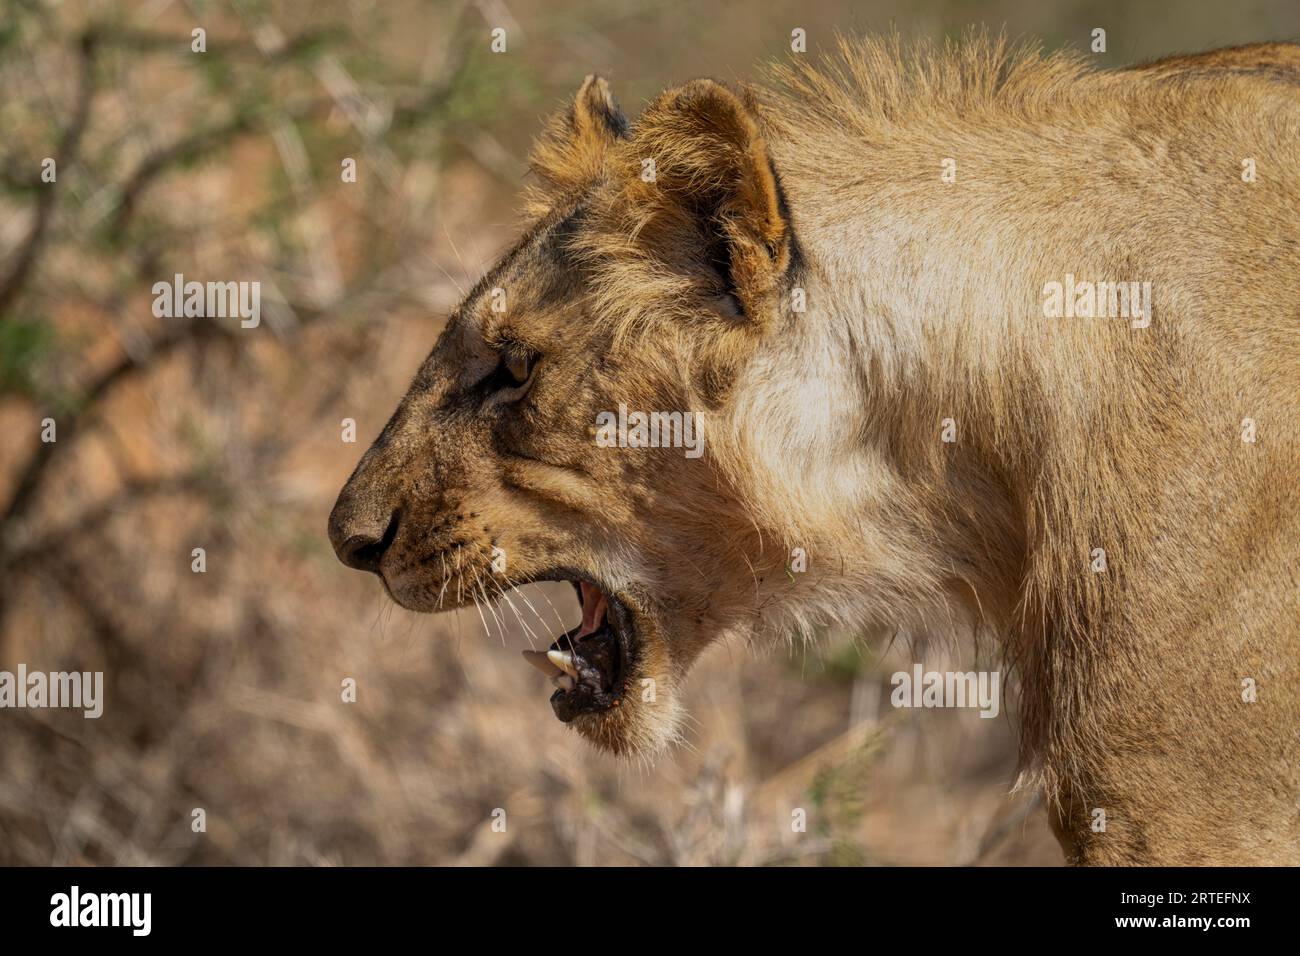 Close-up portrait of a young, male lion (Panthera leo) snarling with an open mouth; Laikipia, Kenya Stock Photo